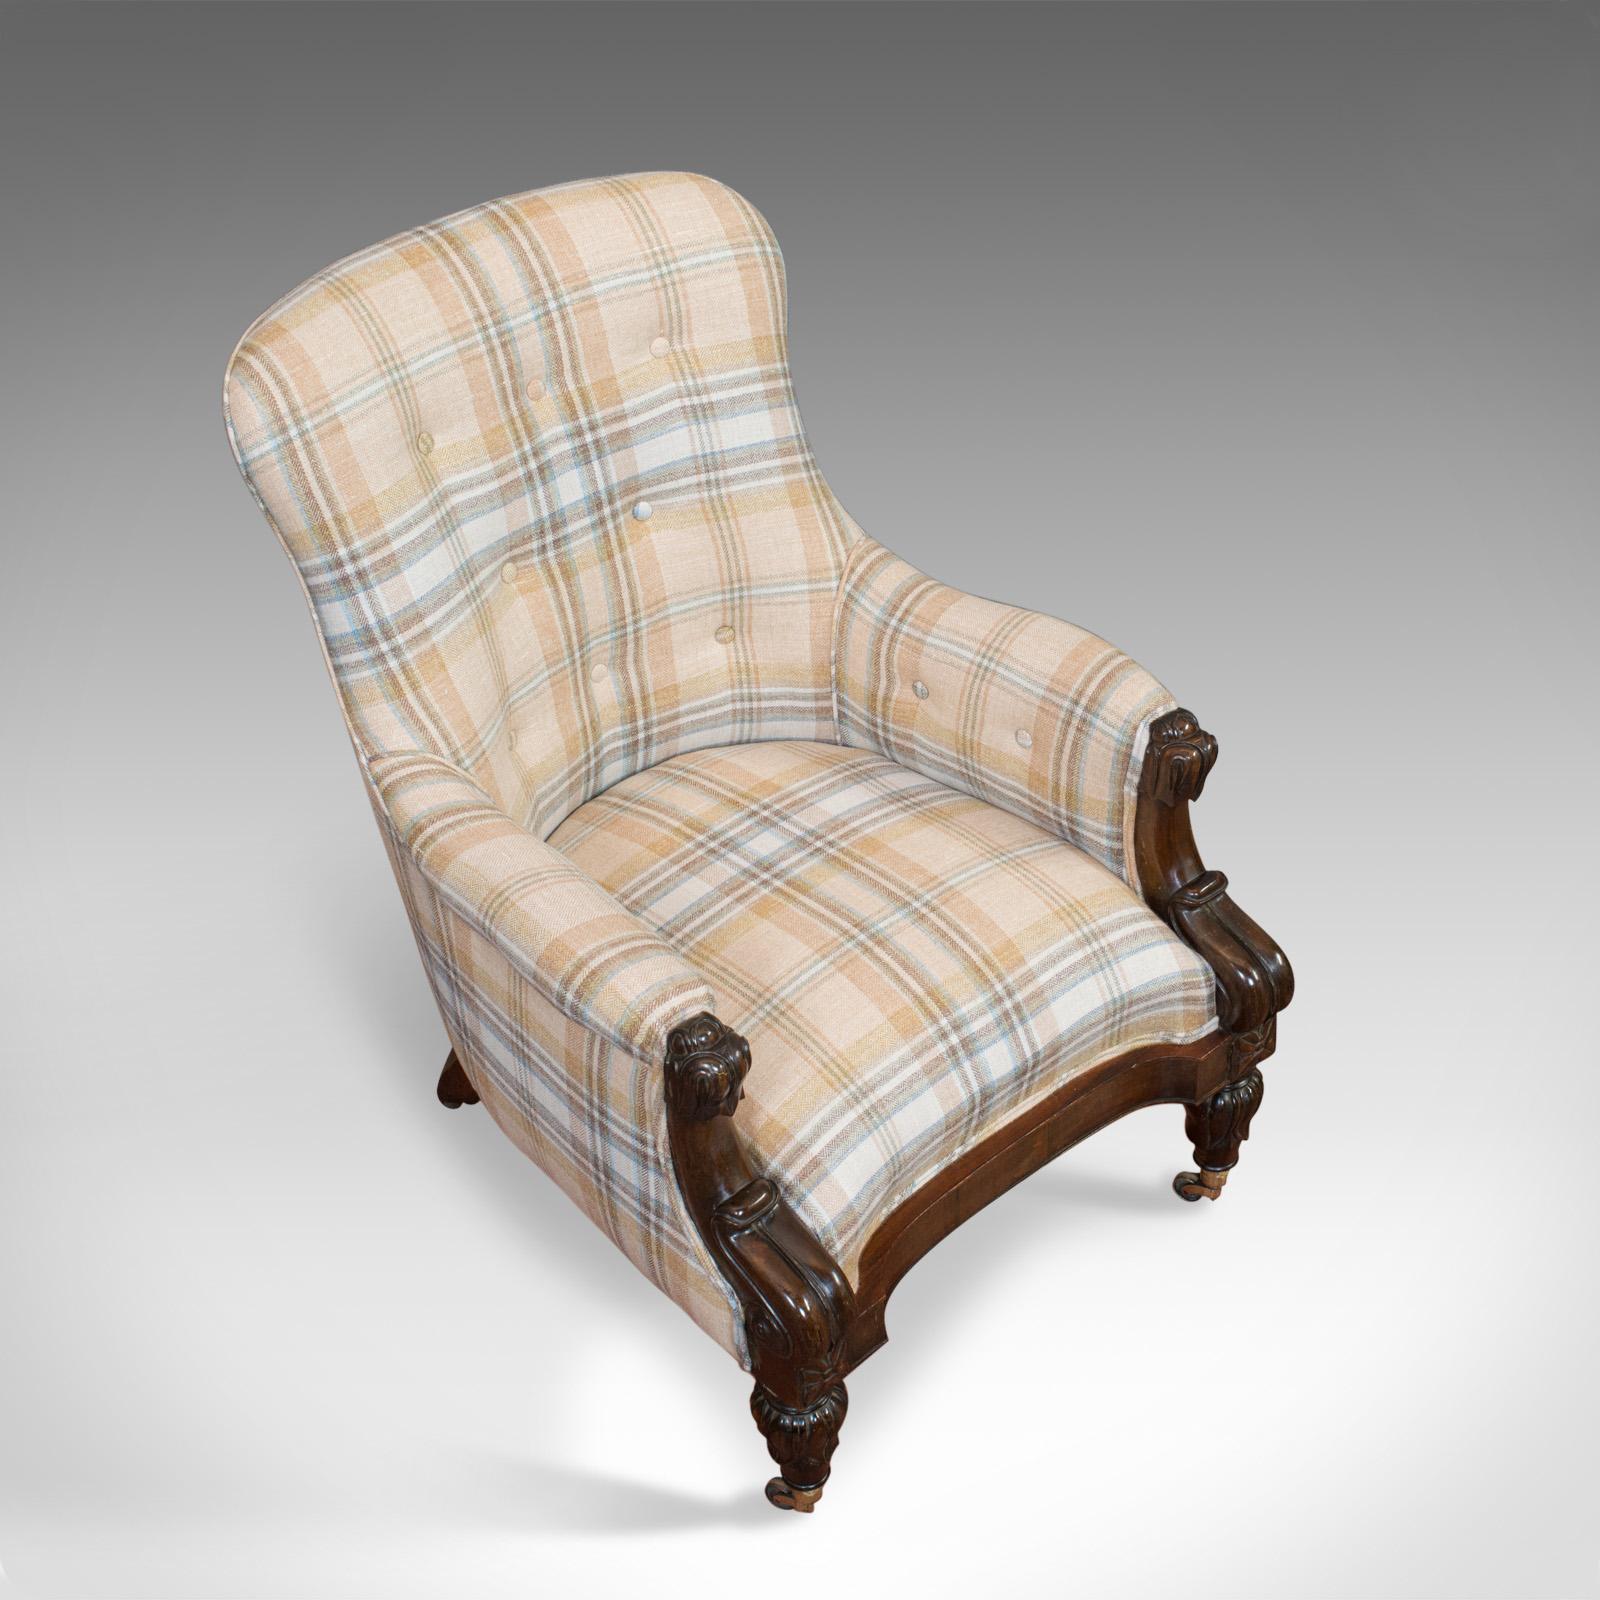 English Antique Gentleman's Armchair, Rosewood, Fireside, Club Chair, William IV